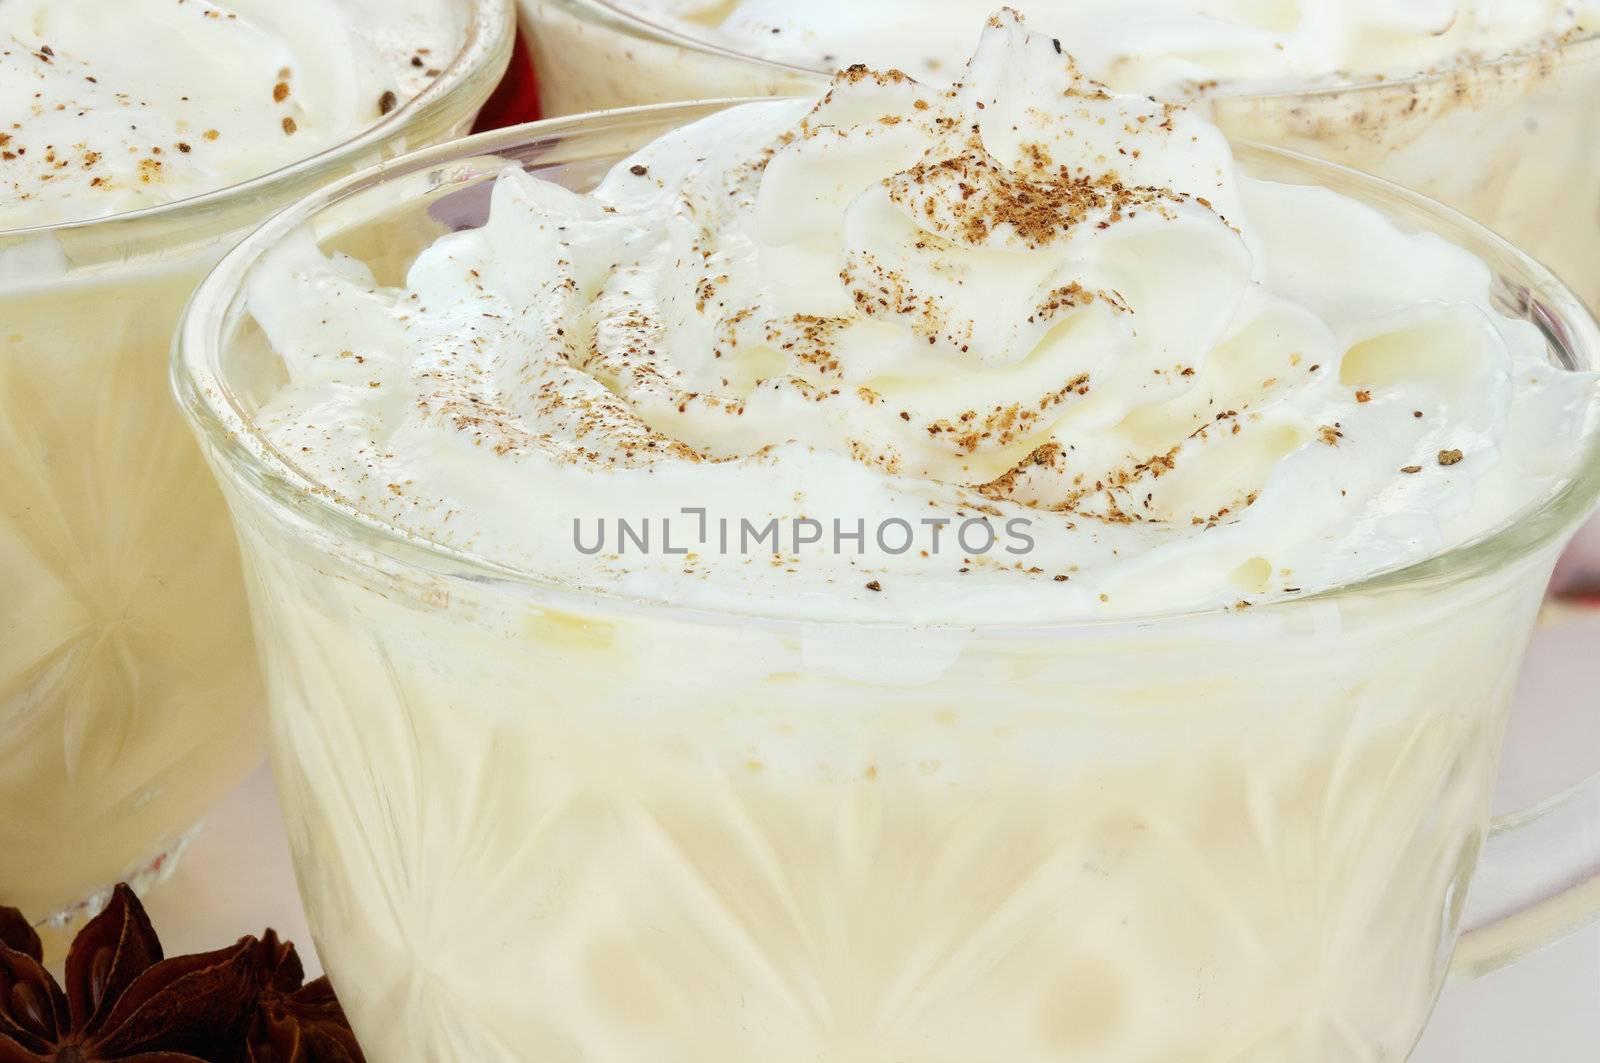 Eggnog with whipped cream and spices. Selective focus with some blur on lower portion of image.